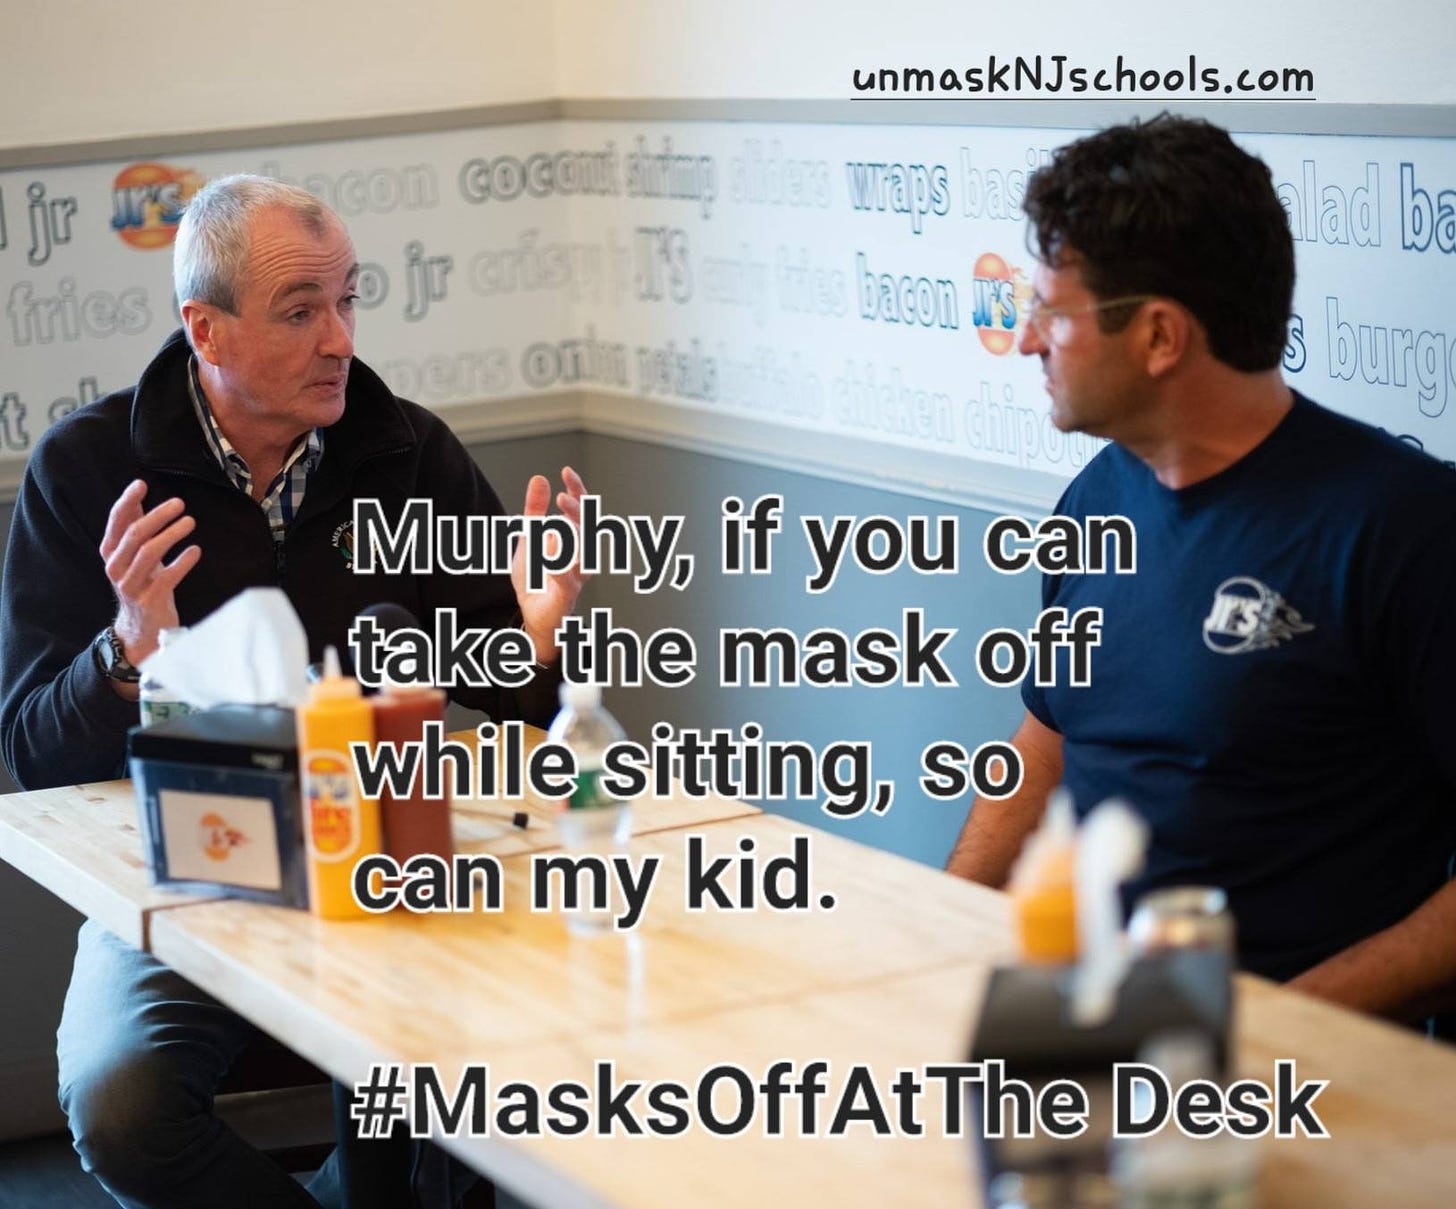 May be an image of 2 people and text that says 'jr fries unmaskNJschools.com con COCON cocomஸn jr UKS wraps bas bacon alad ba burg Murphy, if you can take the mask off while sitting, so can my kid. #MasksOffAtThe Desk'